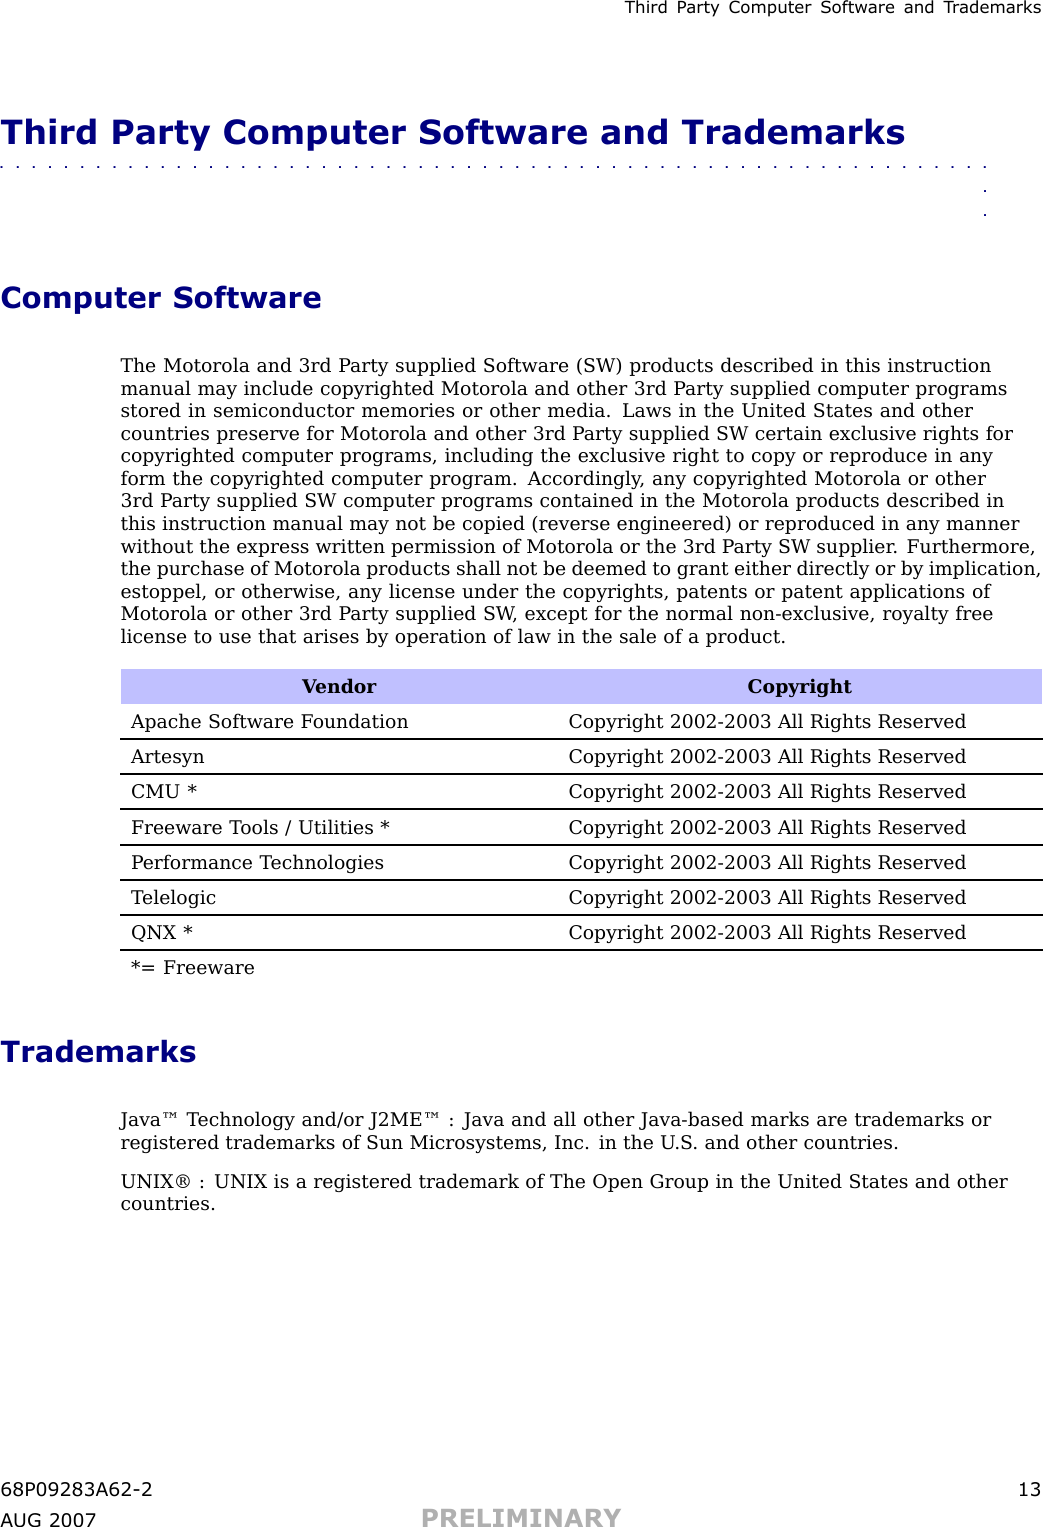 Third P art y Computer Softw are and T r ademarksThird Party Computer Software and Trademarks■■■■■■■■■■■■■■■■■■■■■■■■■■■■■■■■■■■■■■■■■■■■■■■■■■■■■■■■■■■■■■■■Computer SoftwareThe Motorola and 3rd P arty supplied Software (SW) products described in this instructionmanual may include copyrighted Motorola and other 3rd P arty supplied computer programsstored in semiconductor memories or other media. Laws in the United States and othercountries preserve for Motorola and other 3rd P arty supplied SW certain exclusive rights forcopyrighted computer programs, including the exclusive right to copy or reproduce in anyform the copyrighted computer program. Accordingly , any copyrighted Motorola or other3rd P arty supplied SW computer programs contained in the Motorola products described inthis instruction manual may not be copied (reverse engineered) or reproduced in any mannerwithout the express written permission of Motorola or the 3rd P arty SW supplier . Furthermore,the purchase of Motorola products shall not be deemed to grant either directly or by implication,estoppel, or otherwise, any license under the copyrights, patents or patent applications ofMotorola or other 3rd P arty supplied SW , except for the normal non -exclusive, royalty freelicense to use that arises by operation of law in the sale of a product.V endor CopyrightApache Software F oundation Copyright 2002-2003 All Rights ReservedArtesynCopyright 2002-2003 All Rights ReservedCMU *Copyright 2002-2003 All Rights ReservedFreeware T ools / Utilities * Copyright 2002-2003 All Rights ReservedP erformance T echnologies Copyright 2002-2003 All Rights ReservedT elelogic Copyright 2002-2003 All Rights ReservedQNX *Copyright 2002-2003 All Rights Reserved*= FreewareTrademarksJava™ T echnology and/or J2ME™ : Java and all other Java -based marks are trademarks orregistered trademarks of Sun Microsystems, Inc. in the U .S . and other countries.UNIX® : UNIX is a registered trademark of The Open Group in the United States and othercountries.68P09283A62 -2 13A UG 2007 PRELIMINARY